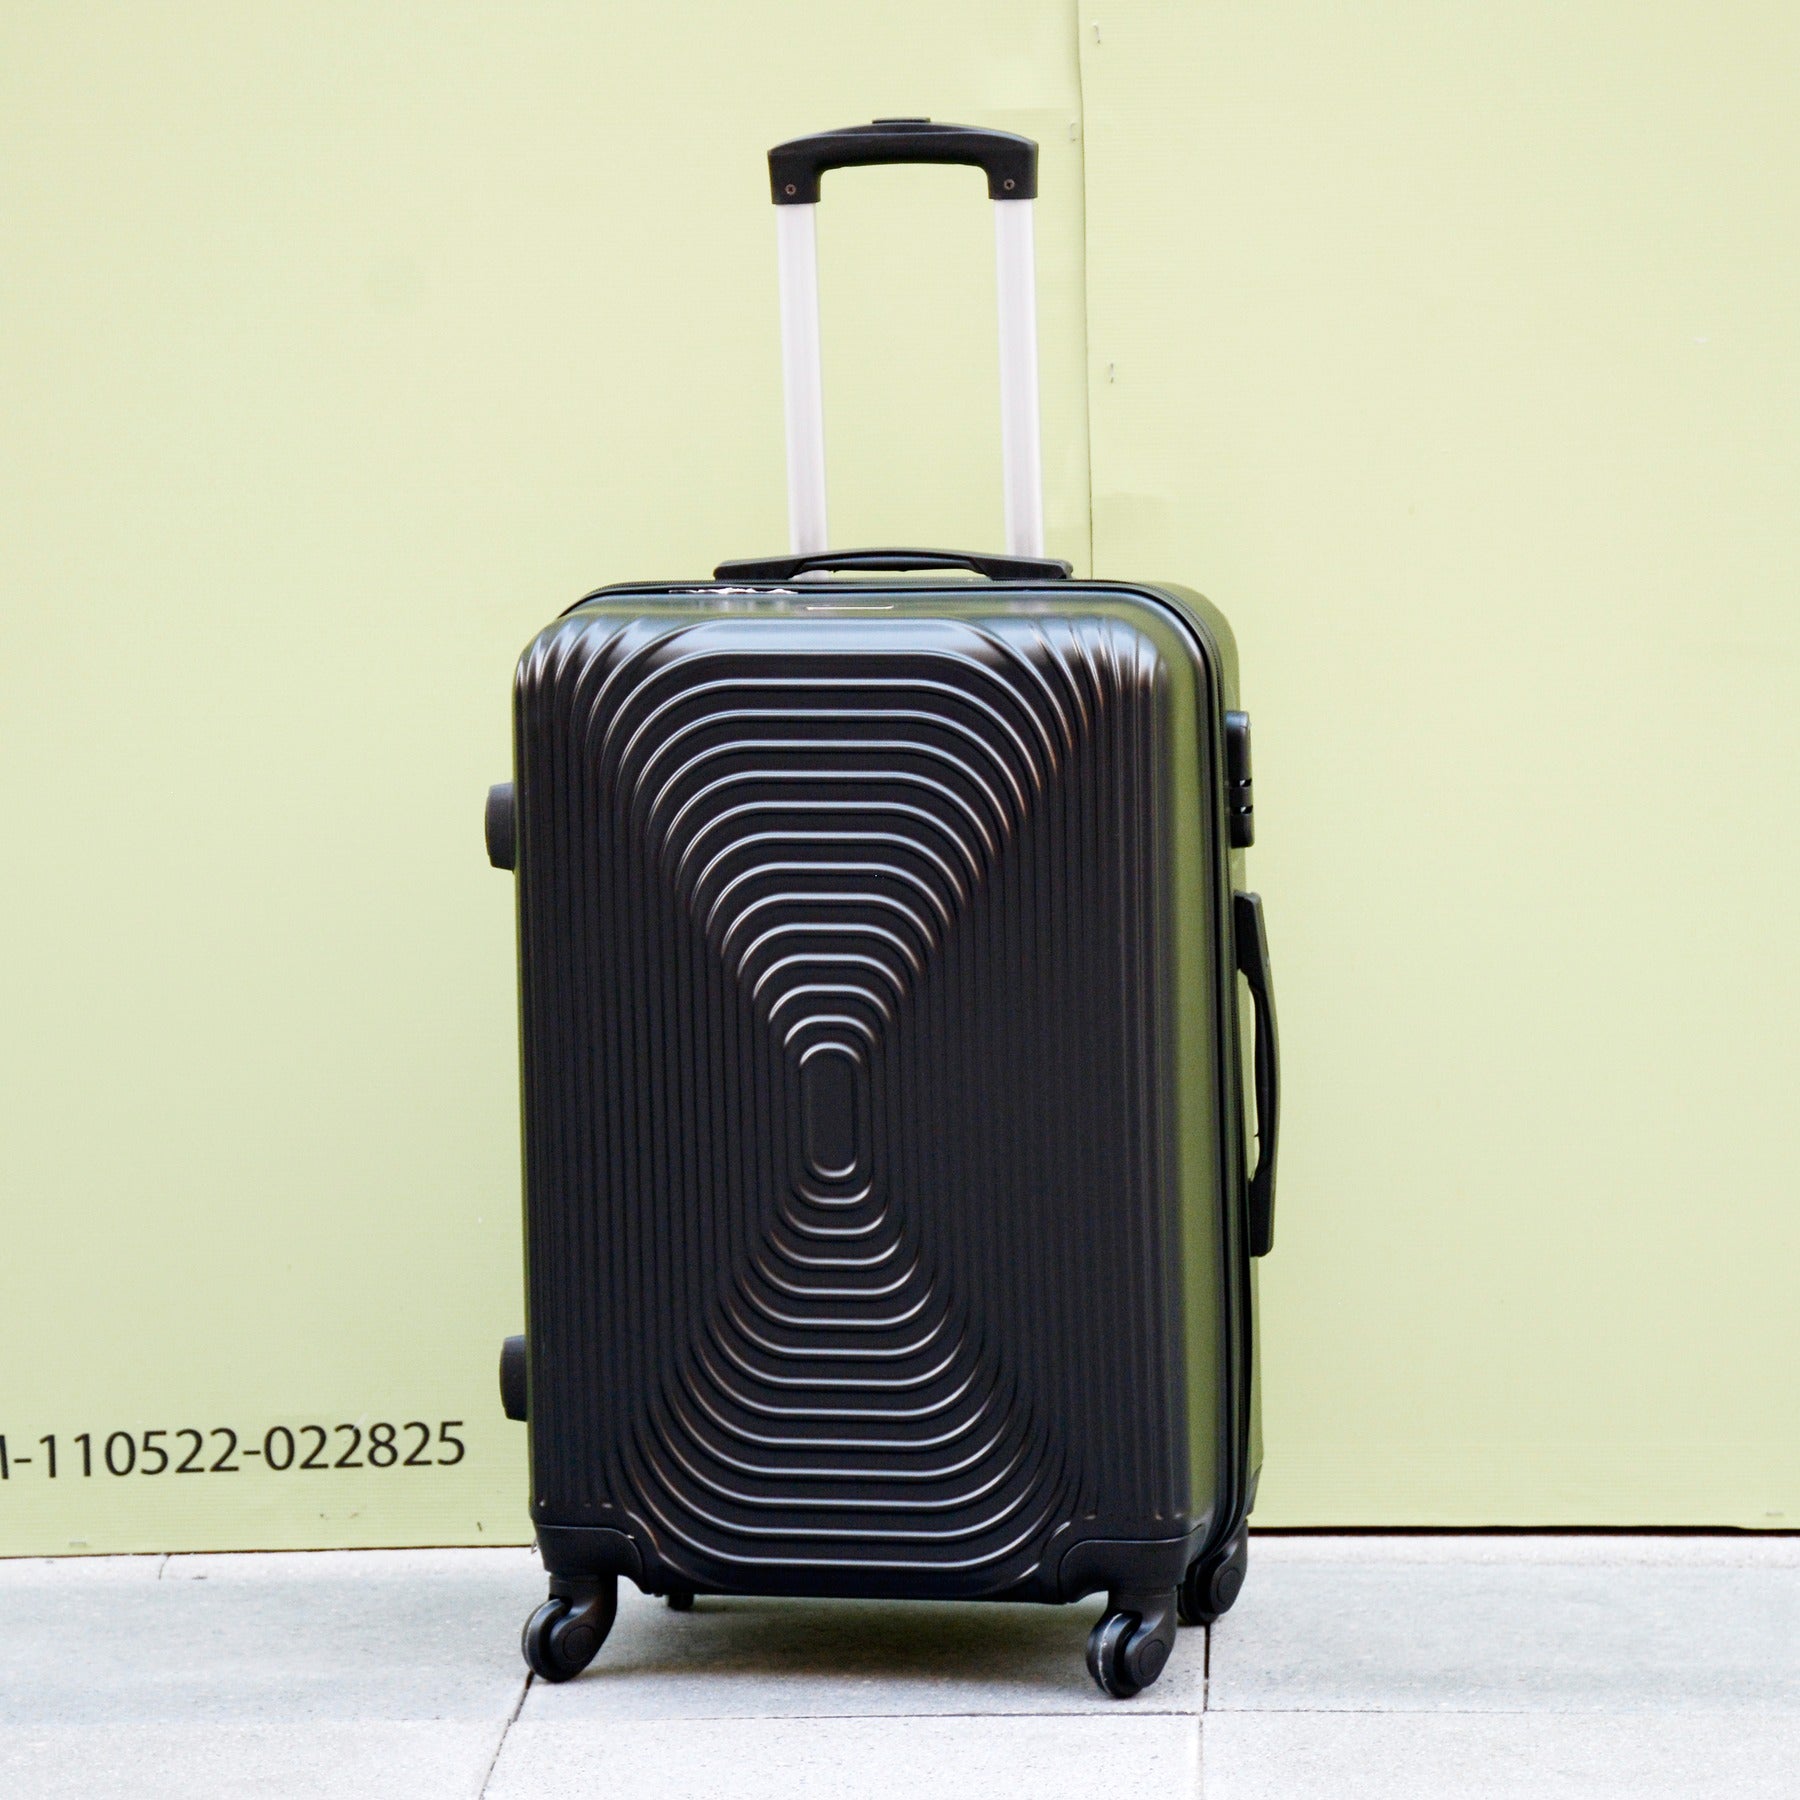 24" Black Colour Fashion ABS 221 Hard Case Checked In Luggage with Spinner Wheel